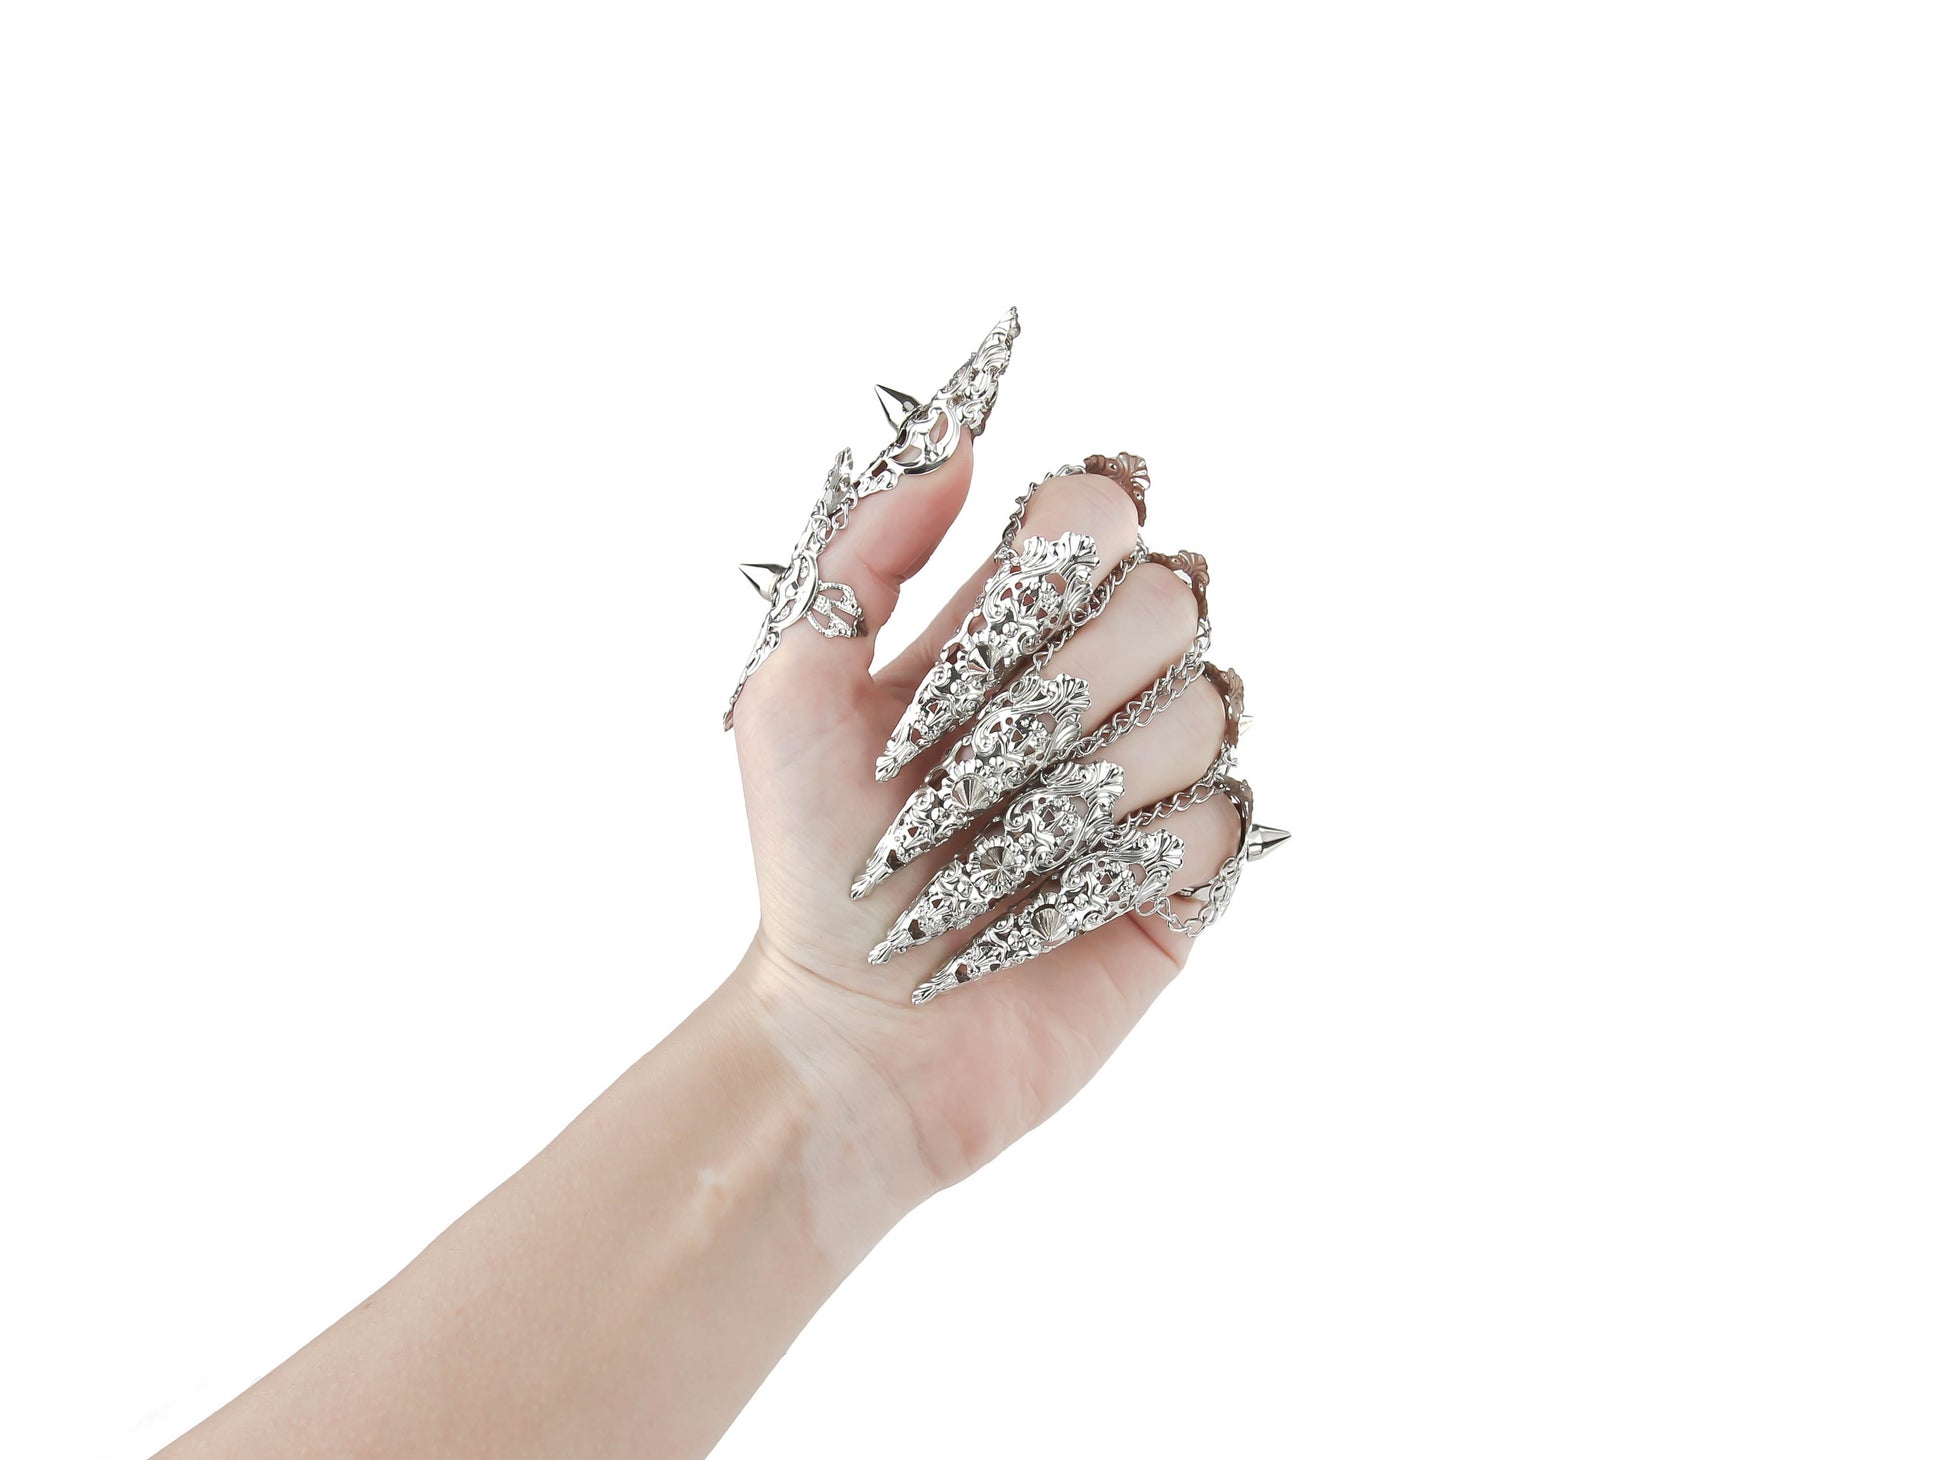  A hand is fully adorned with Myril Jewels' studded nail claw rings, each featuring a detailed silver design with sharp, edgy protrusions. These rings showcase a bold neo-goth aesthetic, perfect for dark-avantgarde fashion enthusiasts. The set is an ideal choice for creating a dramatic look at Halloween events, embodying the gothic-chic and whimsigoth spirit, and is also suited for witchcore, everyday wear, or as statement jewelry for rave parties and festivals.